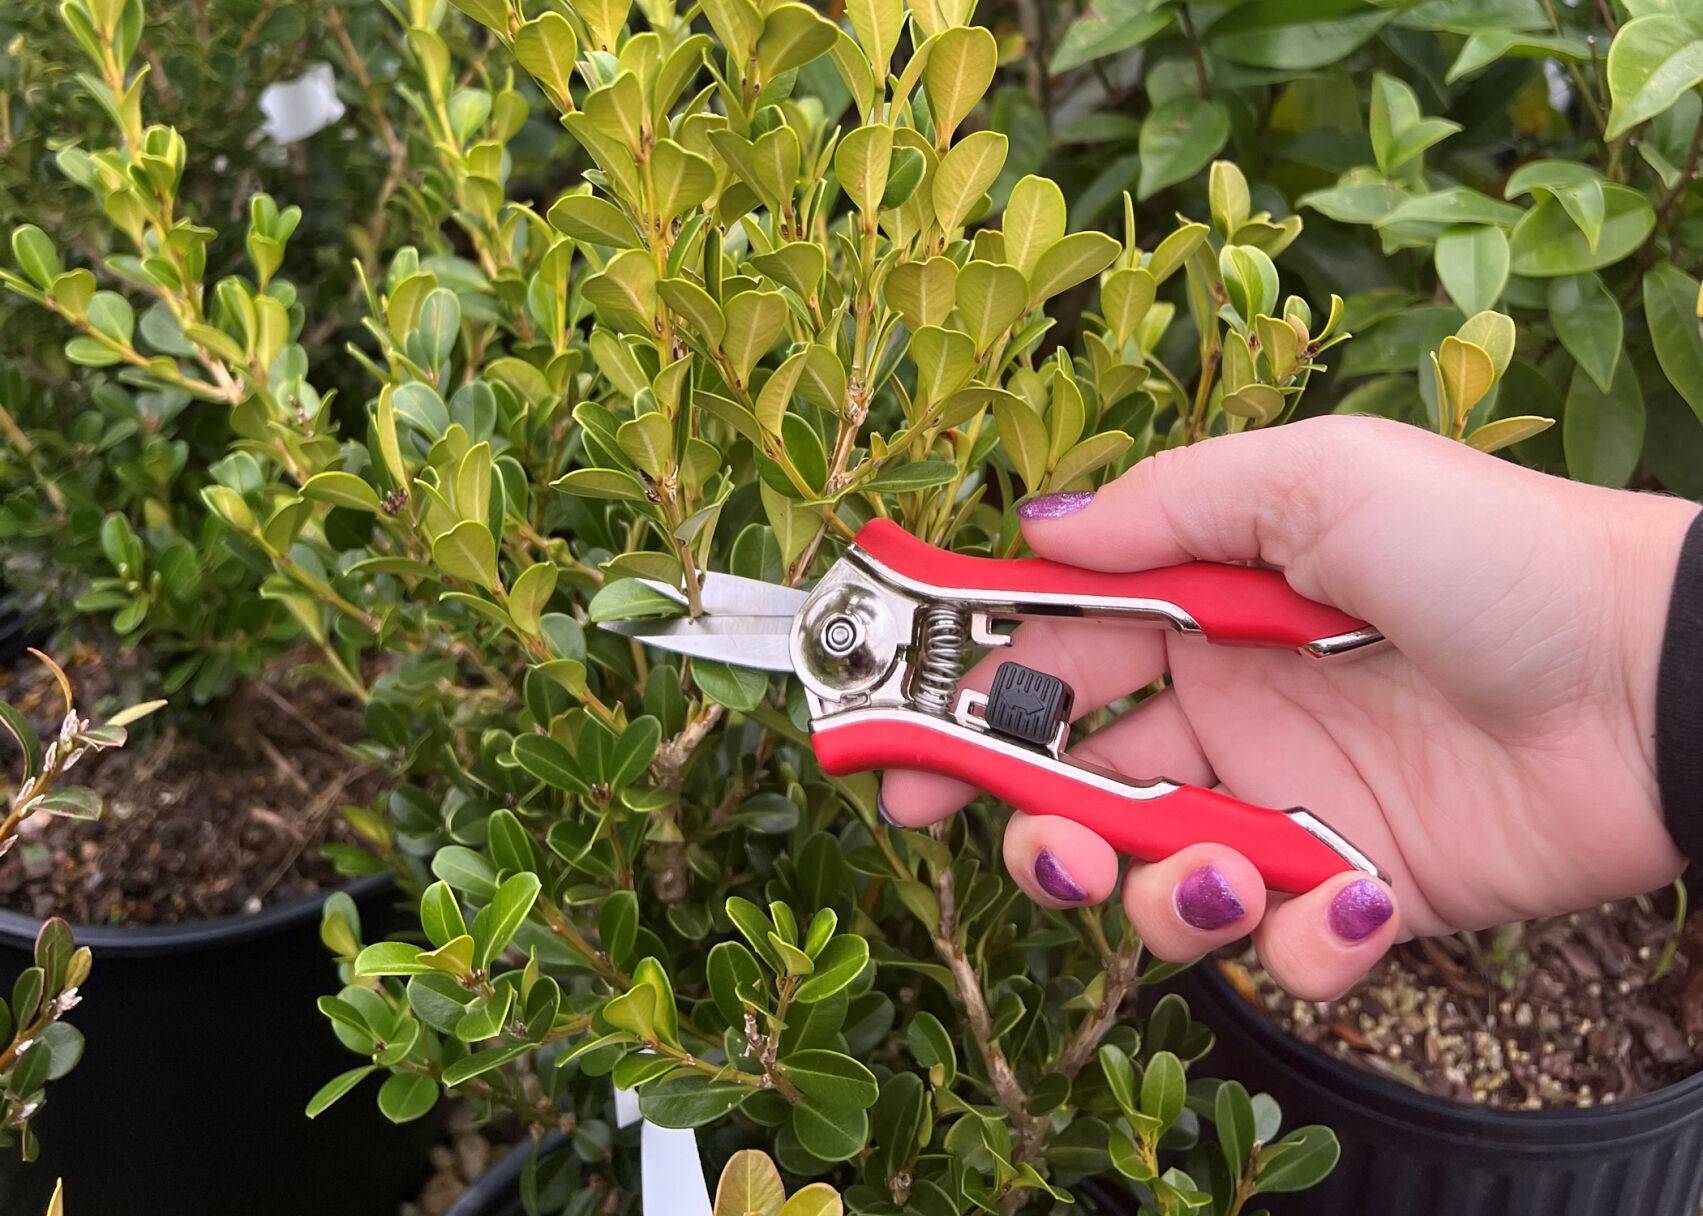 SOUTHERN GARDENING: Prune garden plants at ideal time for each